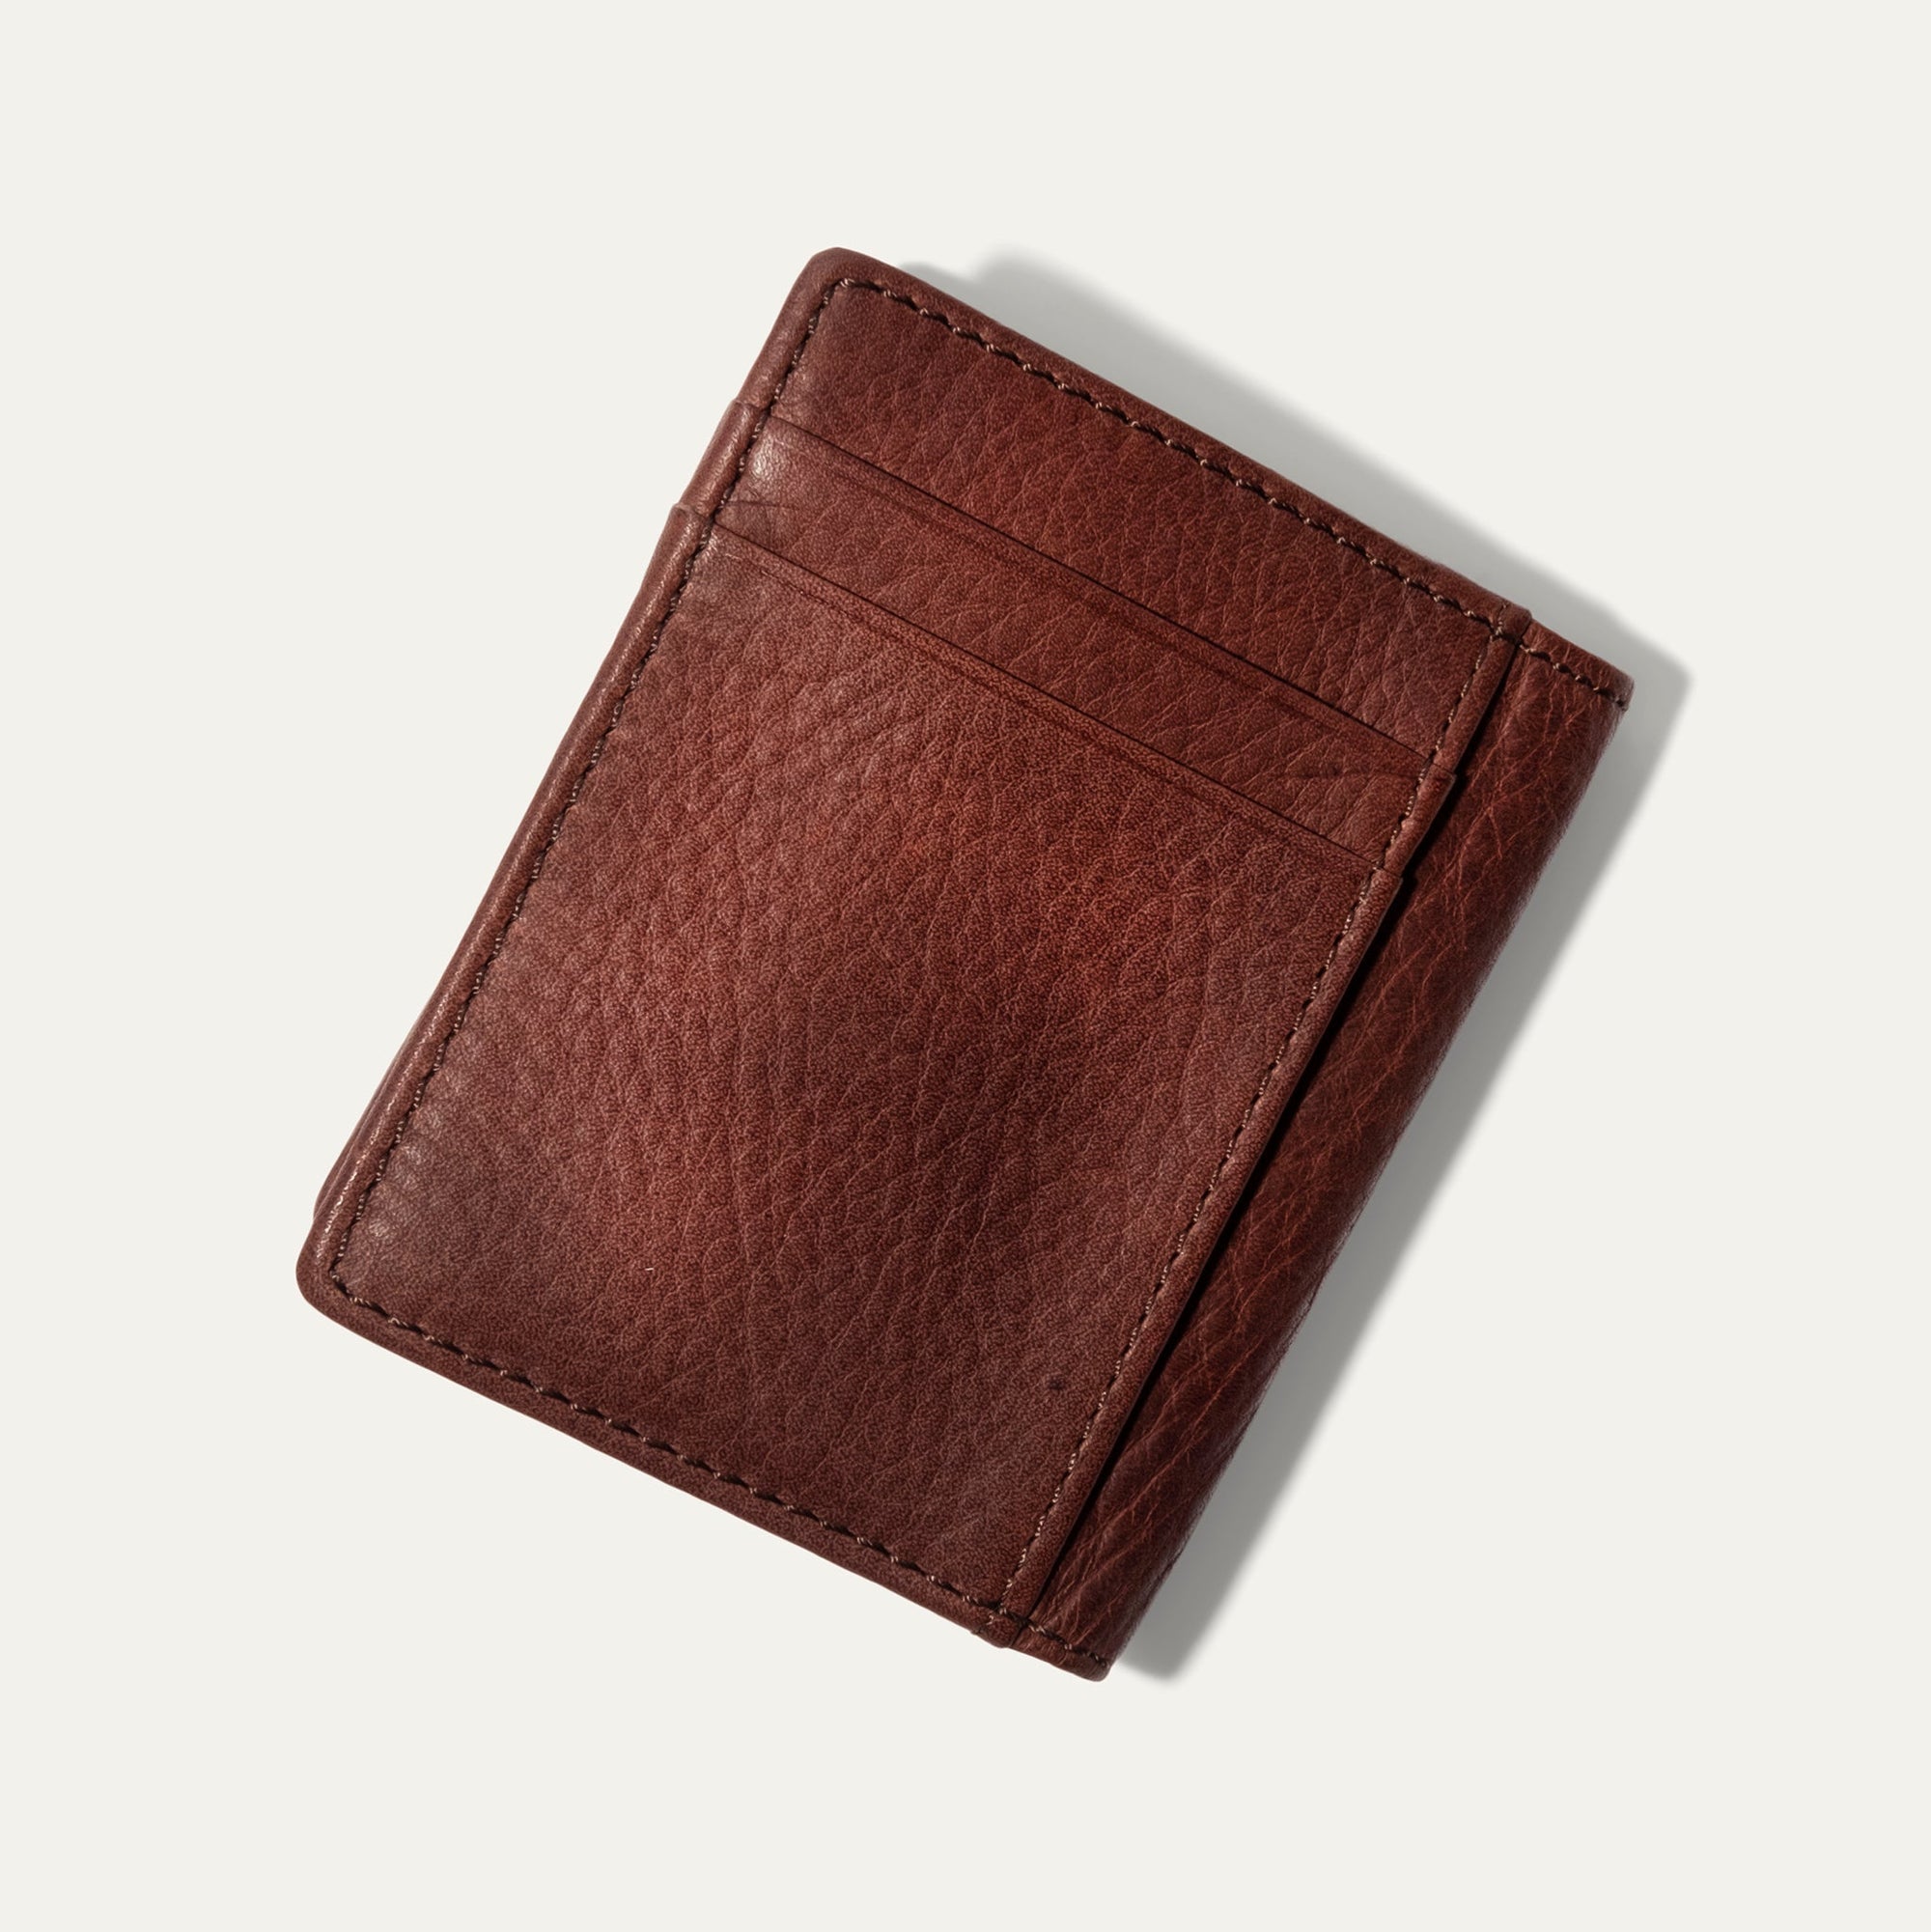 Classic Leather Money Clip Wallet in Cognac by Will Leather Goods